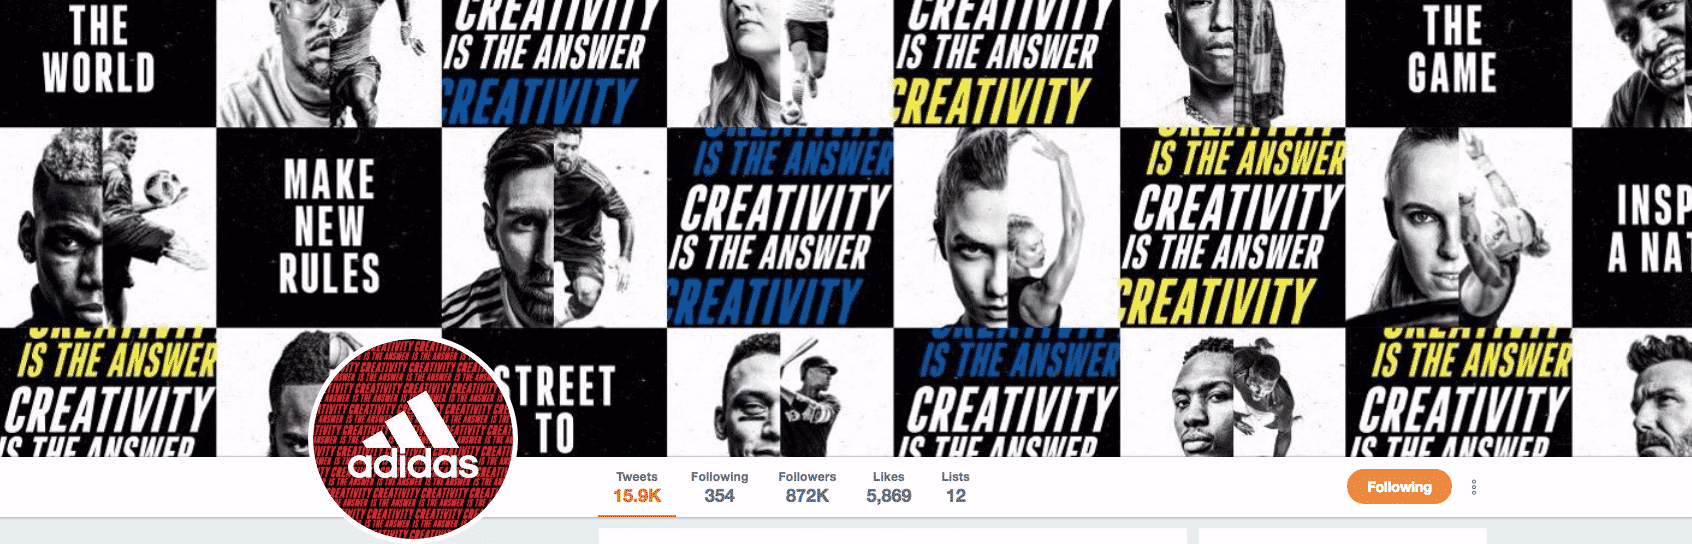 twitter profile and header image examples